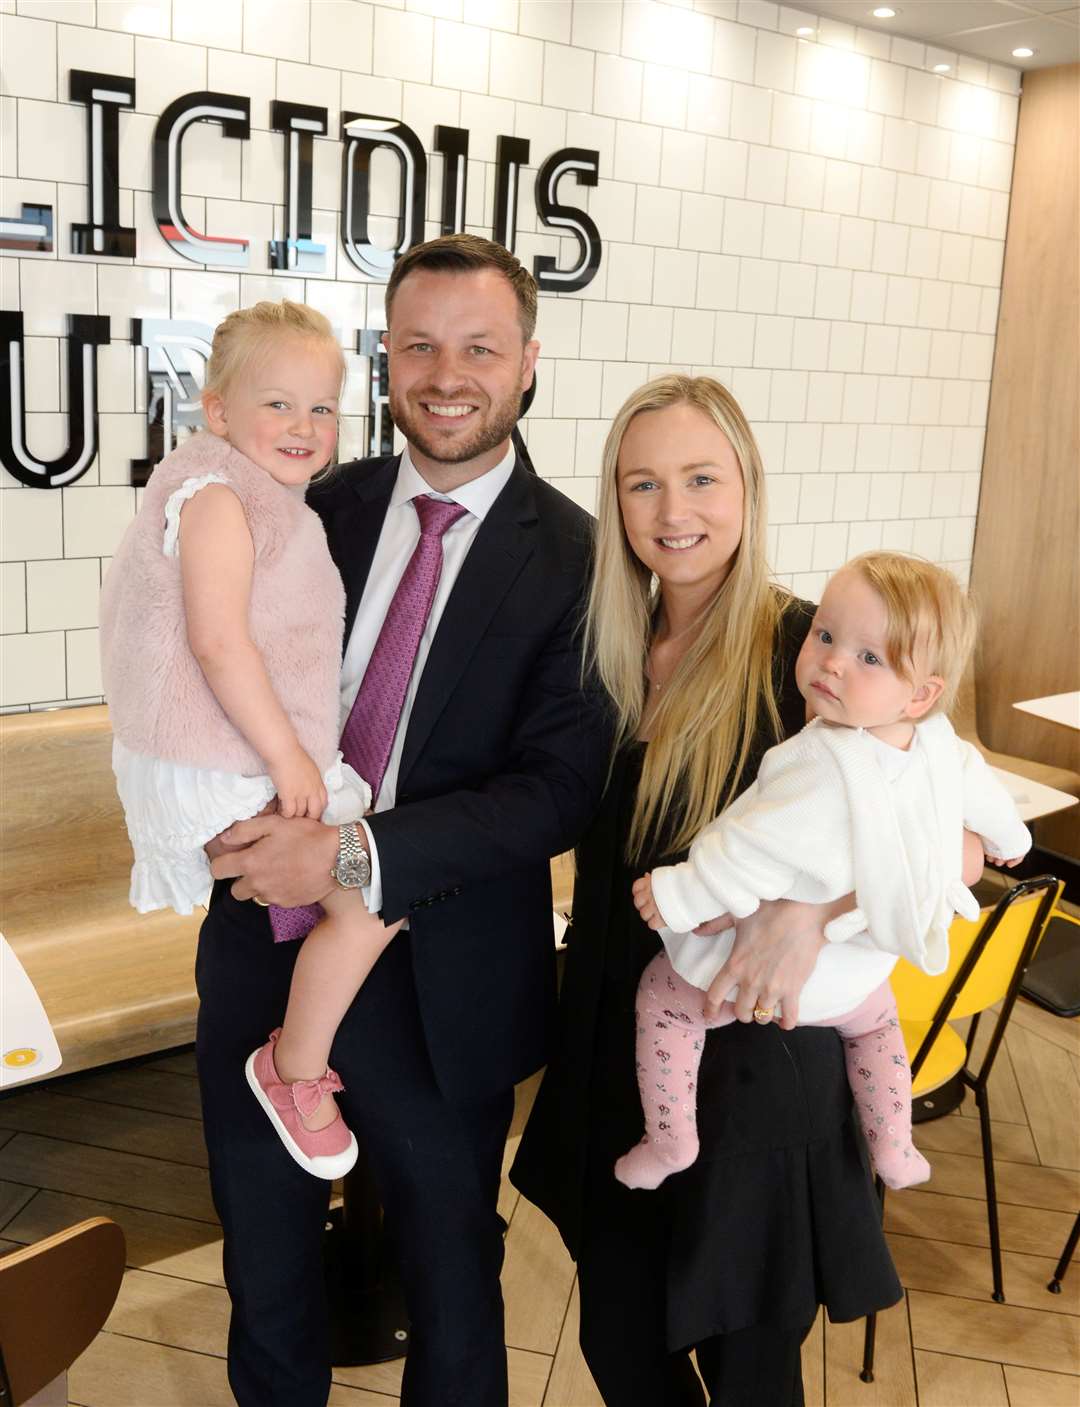 New franchise owner at Nairn McDonald's Iain Fyfe with wife Sarah and children Amelie and Isabella.